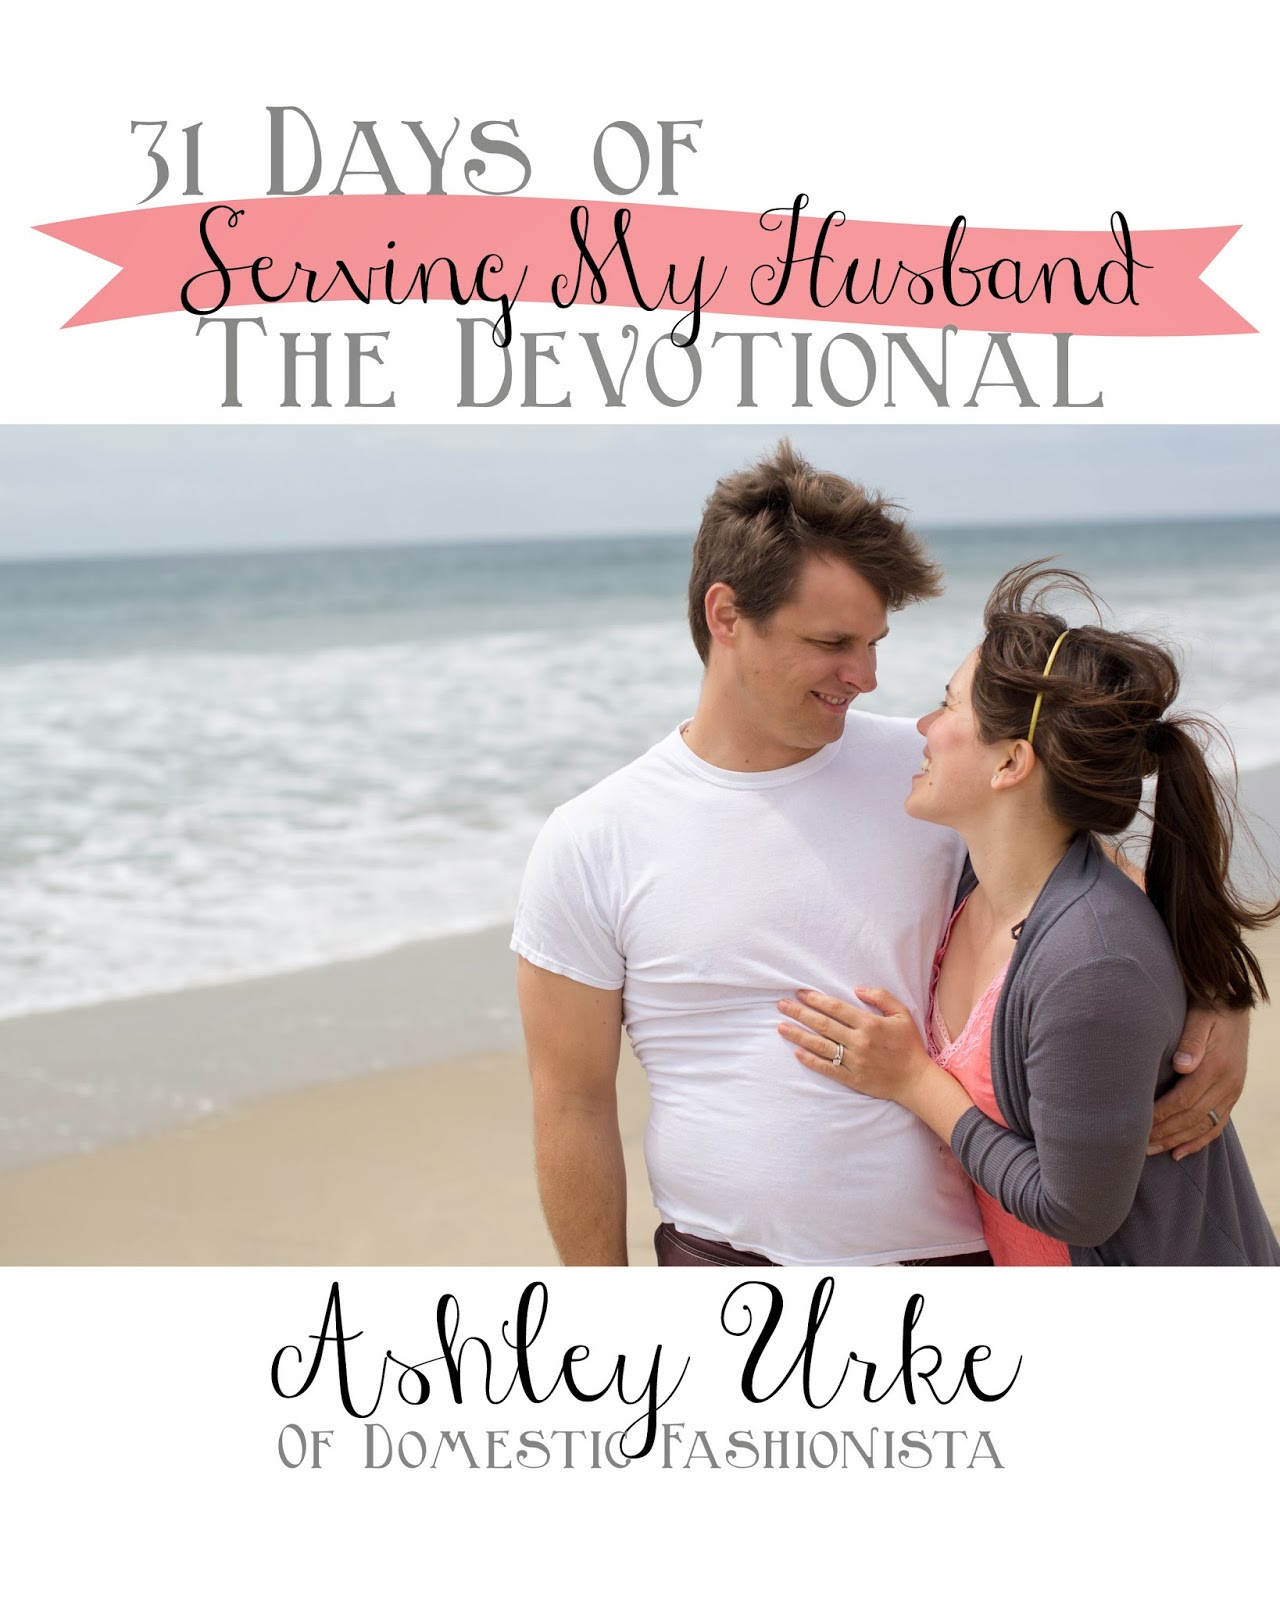 31 Days of Serving my Husband: the Devotional by Ashley, Domestic Fashionista